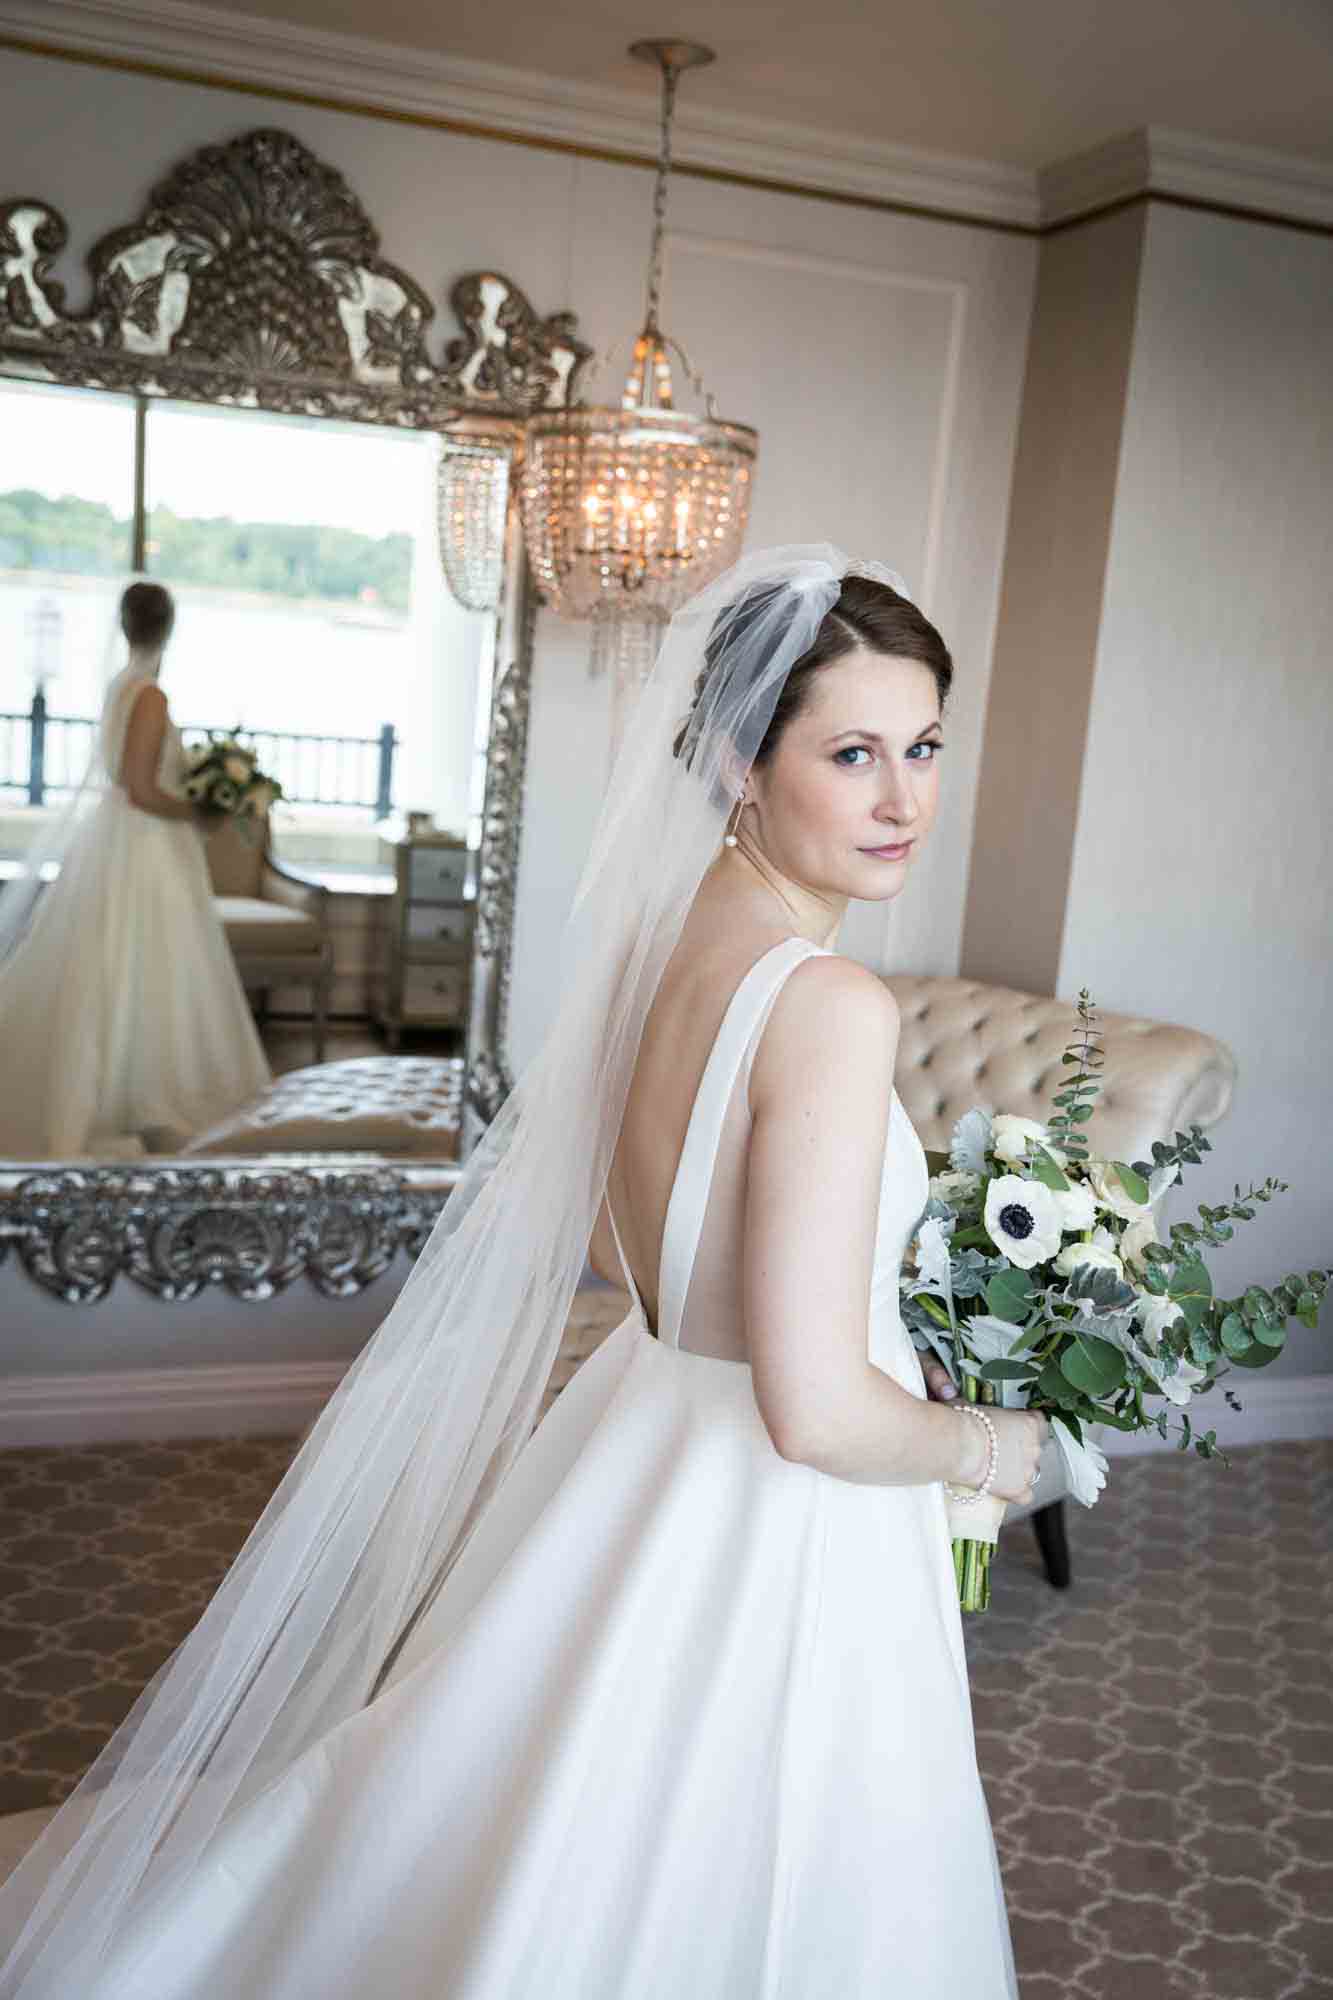 Glen Island Harbour Club wedding photos of bride wearing veil and holding bouquet in bridal suite